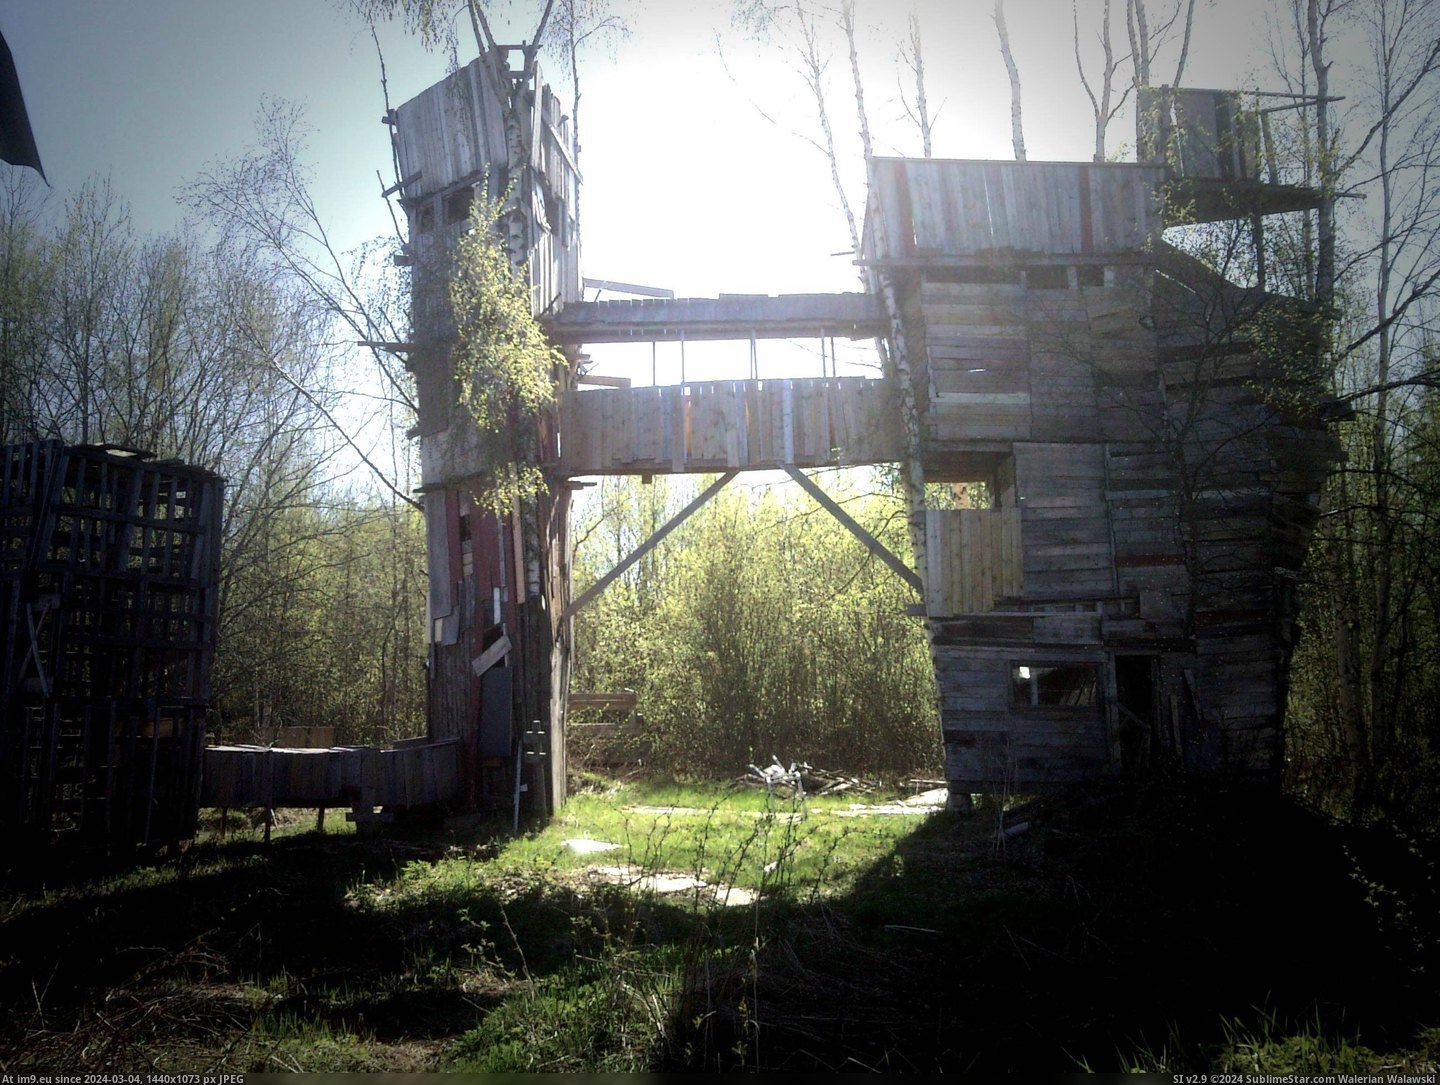 #Work #Hard #Built #Neighbours #Treehouse #Complai #Brothers #Summers #Torn [Pics] Me and my brothers treehouse we built during 5 summers of hard work, it had to be torn down because of neighbours complai Pic. (Image of album My r/PICS favs))